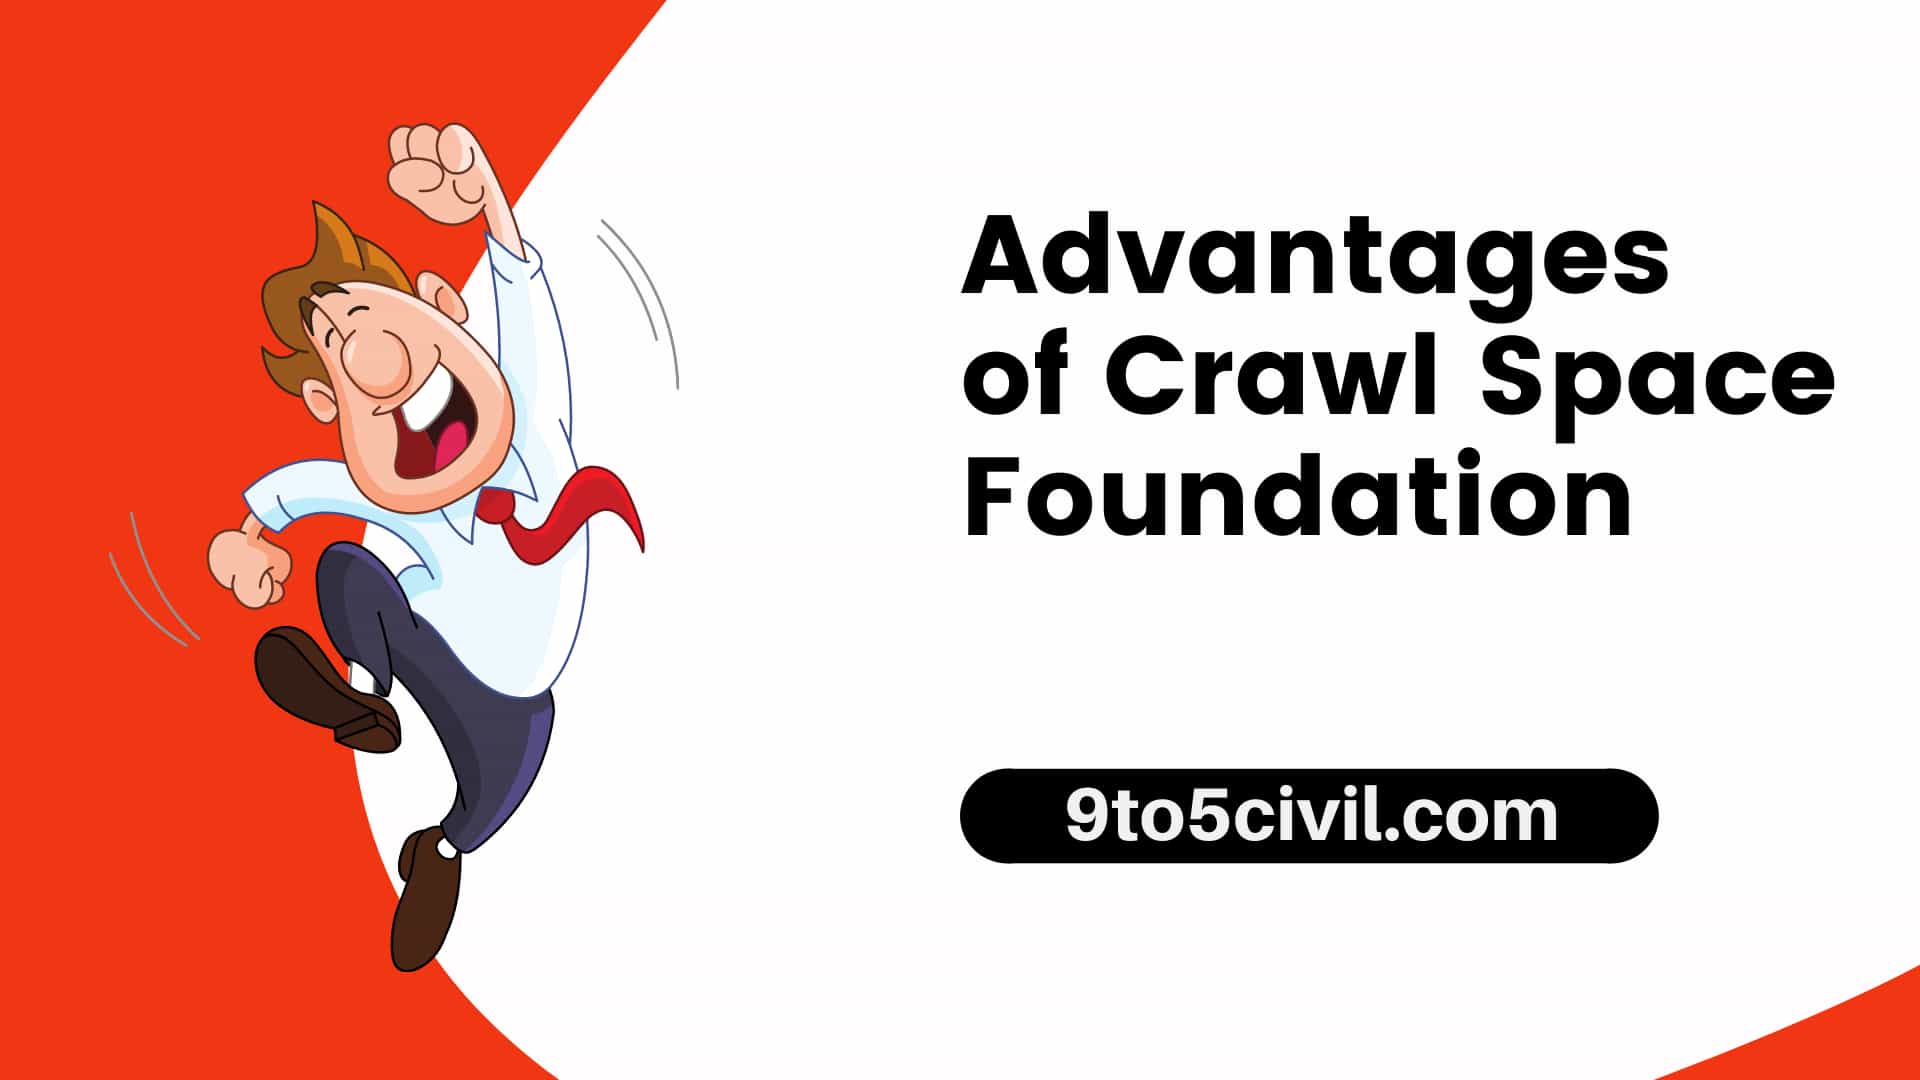 Advantages of Crawl Space Foundation